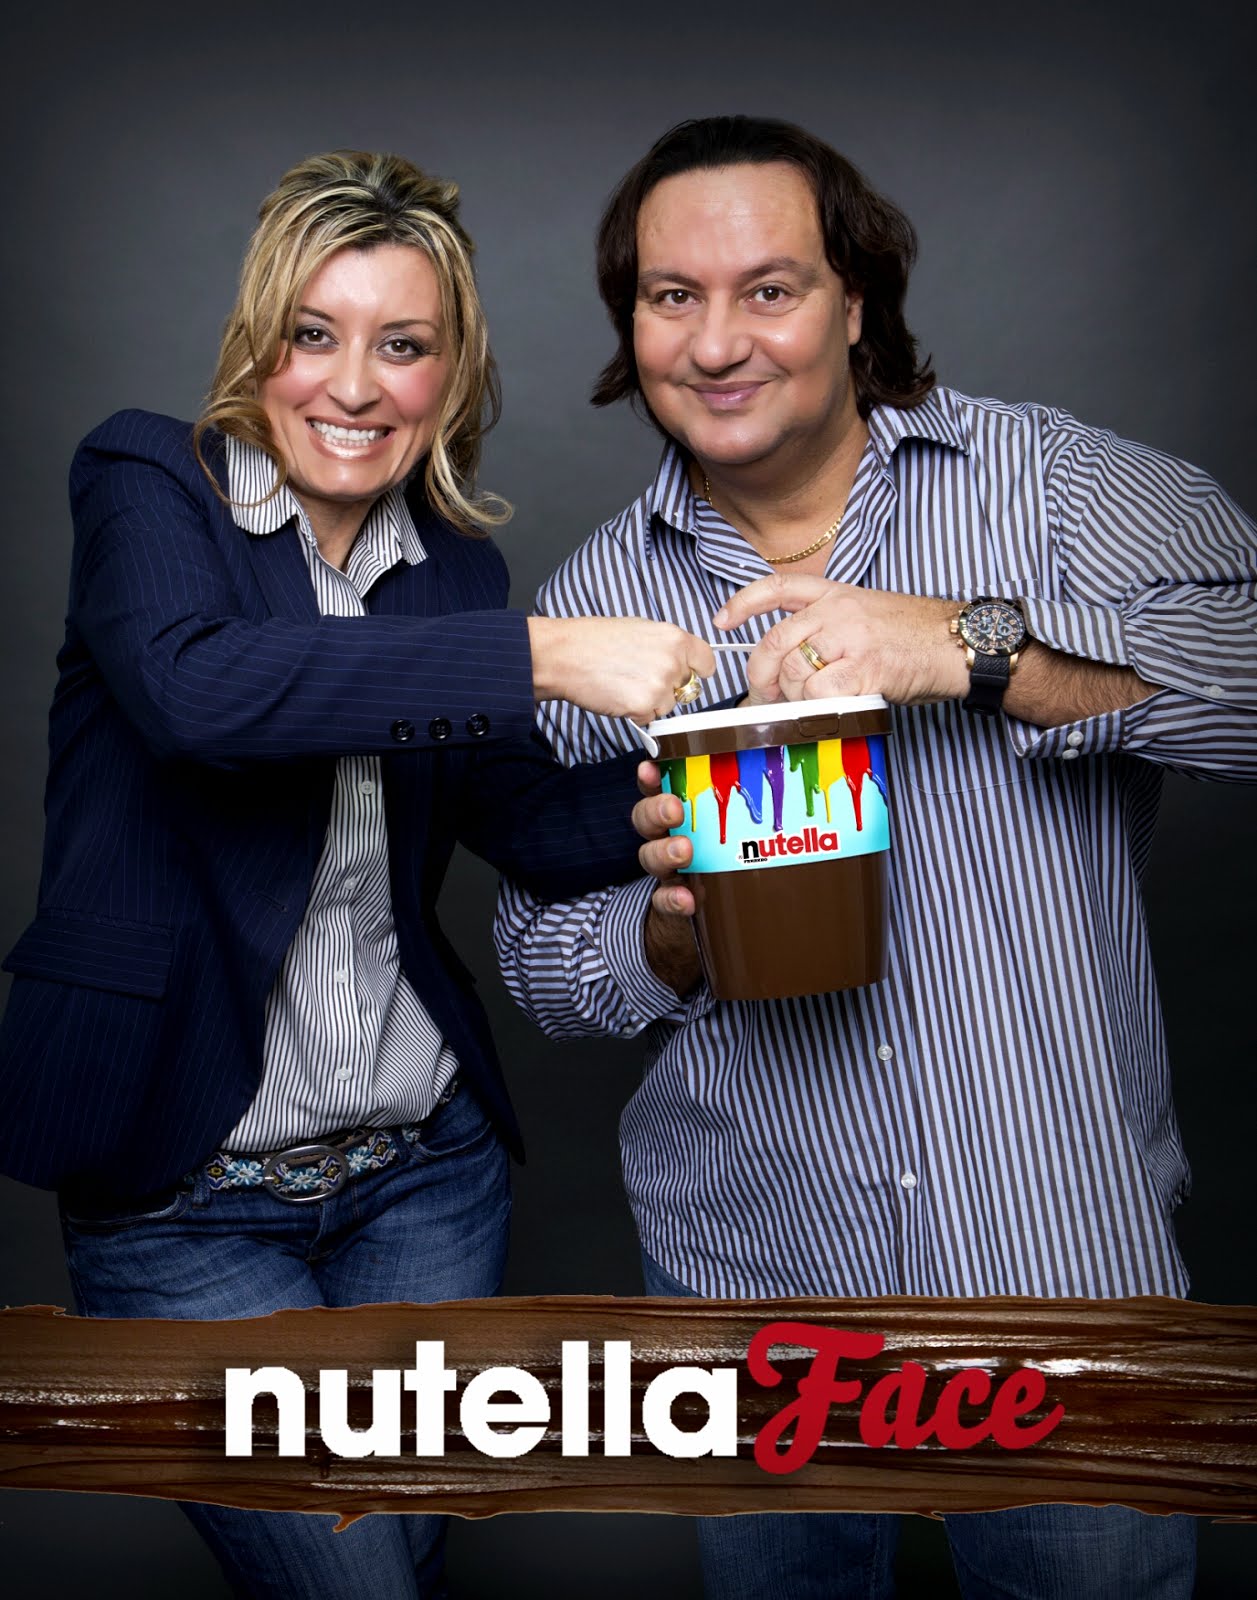 Me, the Music Man and Nutella